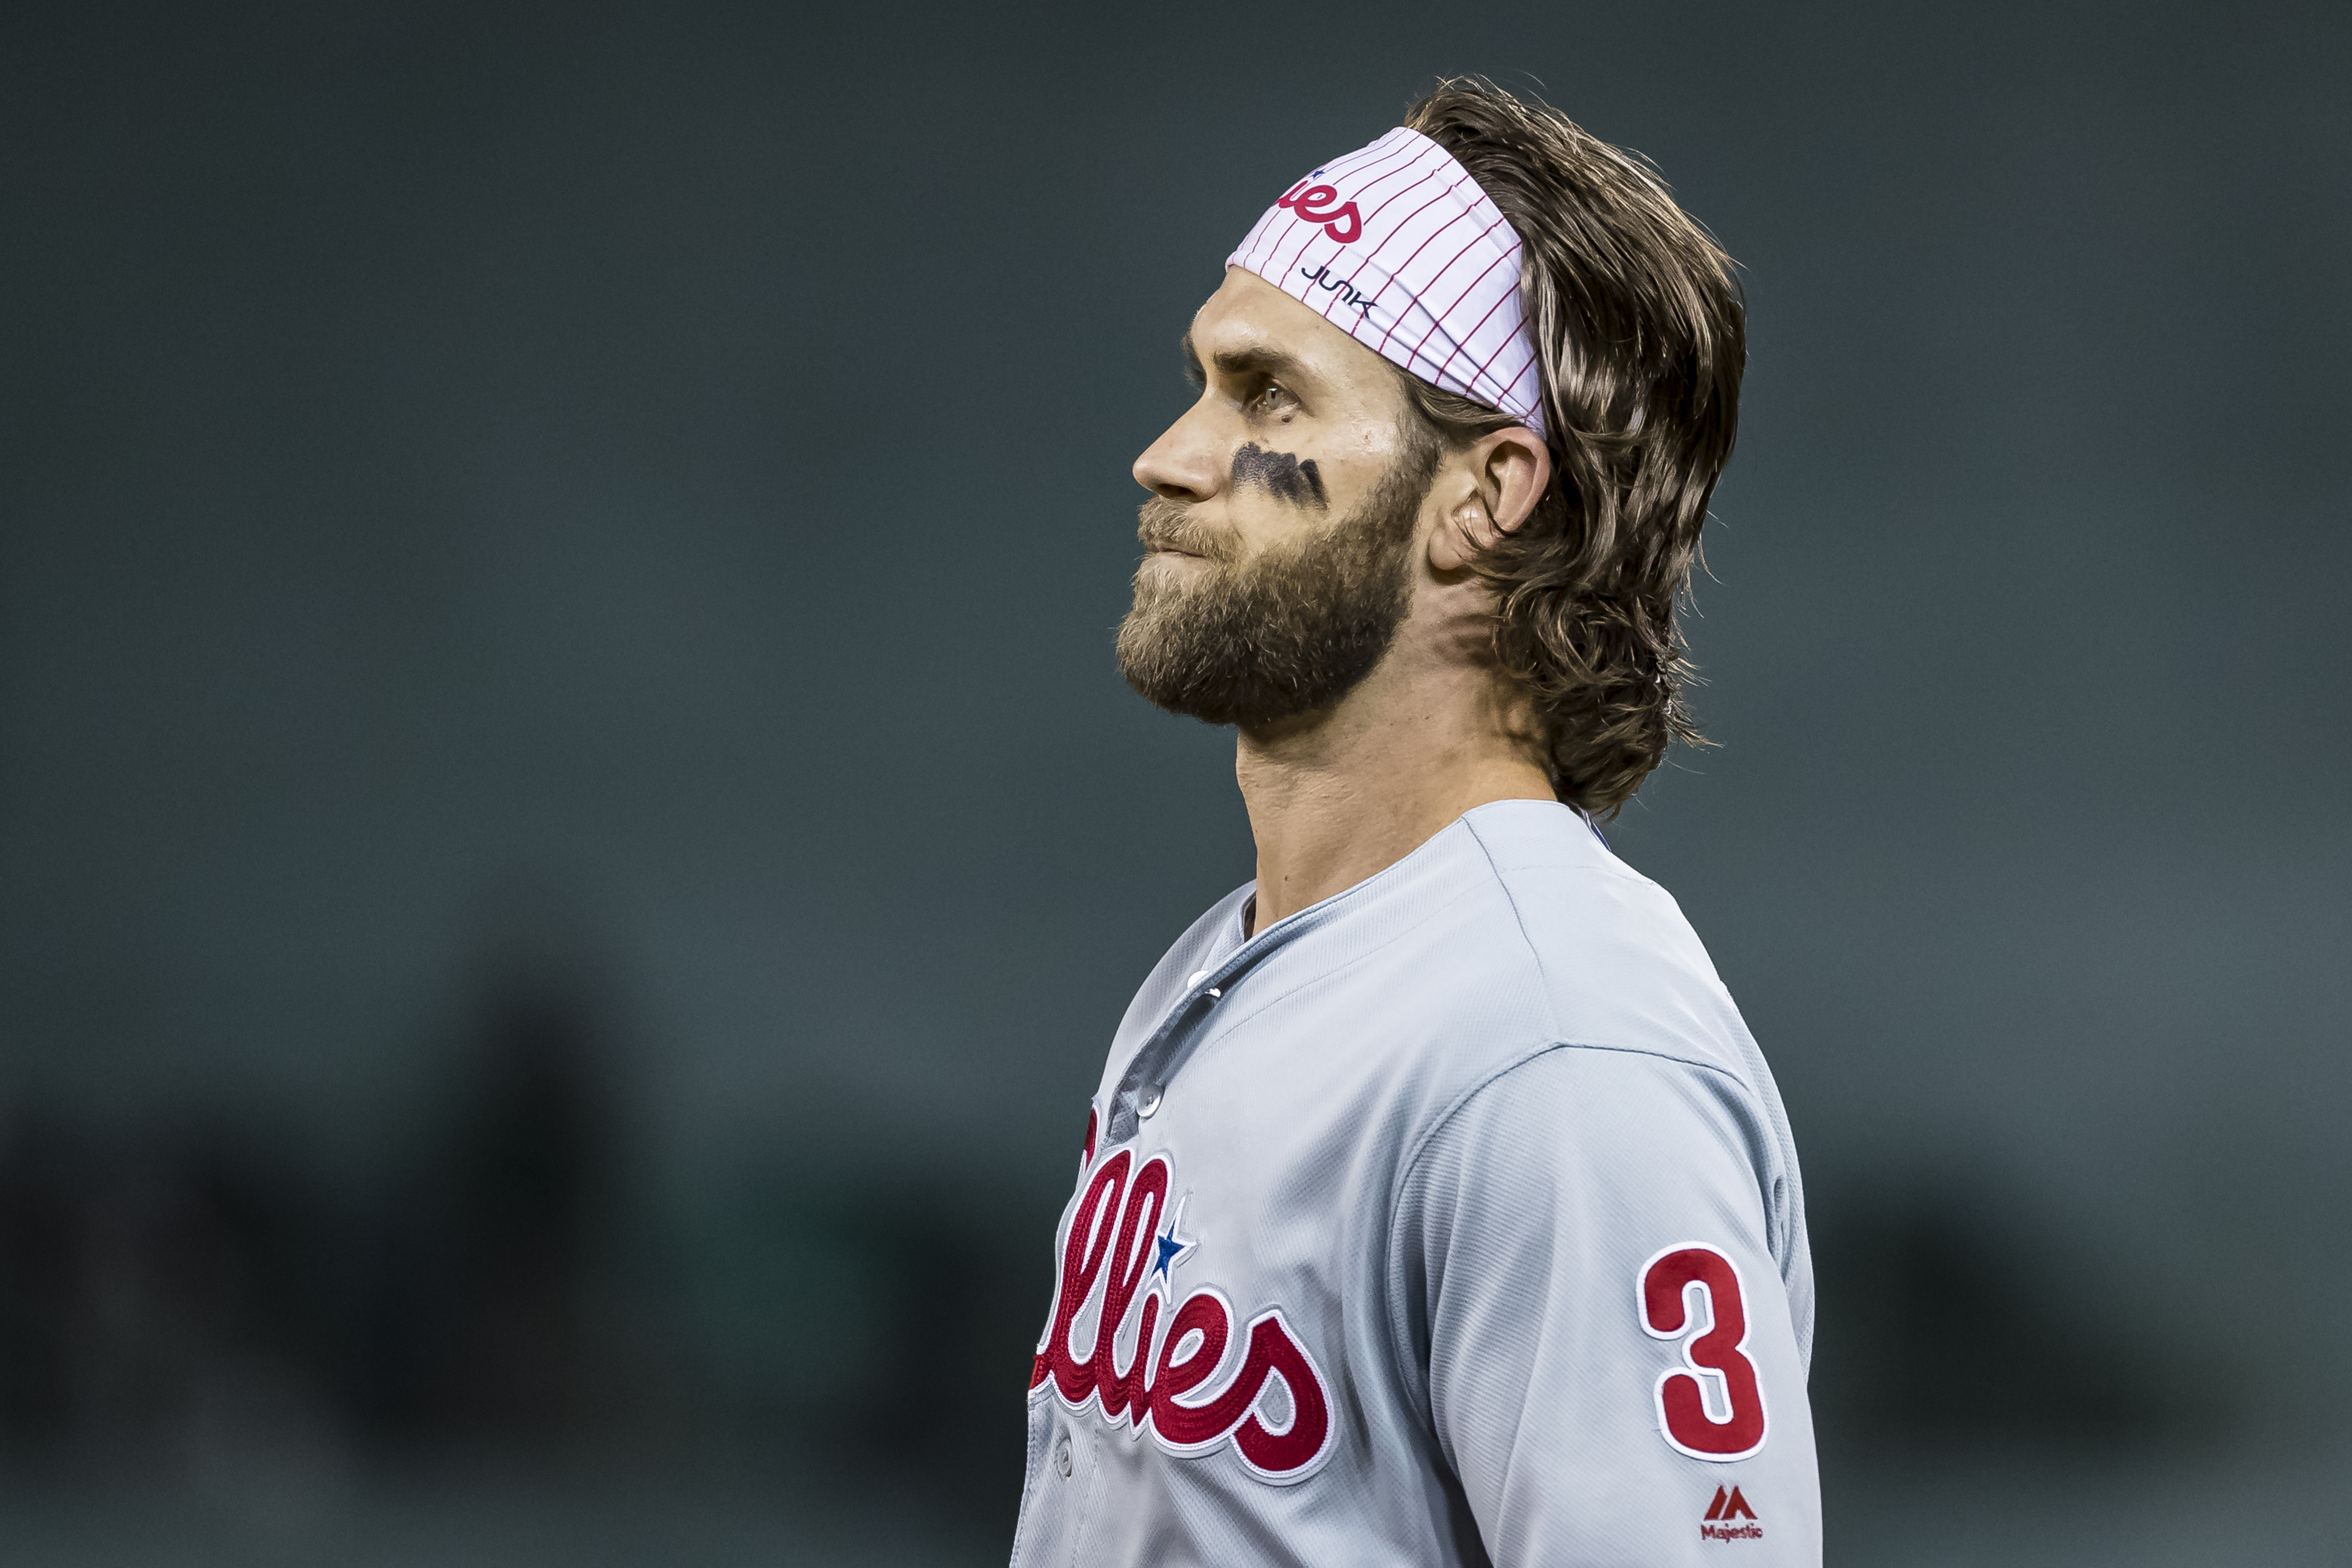 Bryce Harper is on the Phillies now, not the Nationals, who are in the World Series.